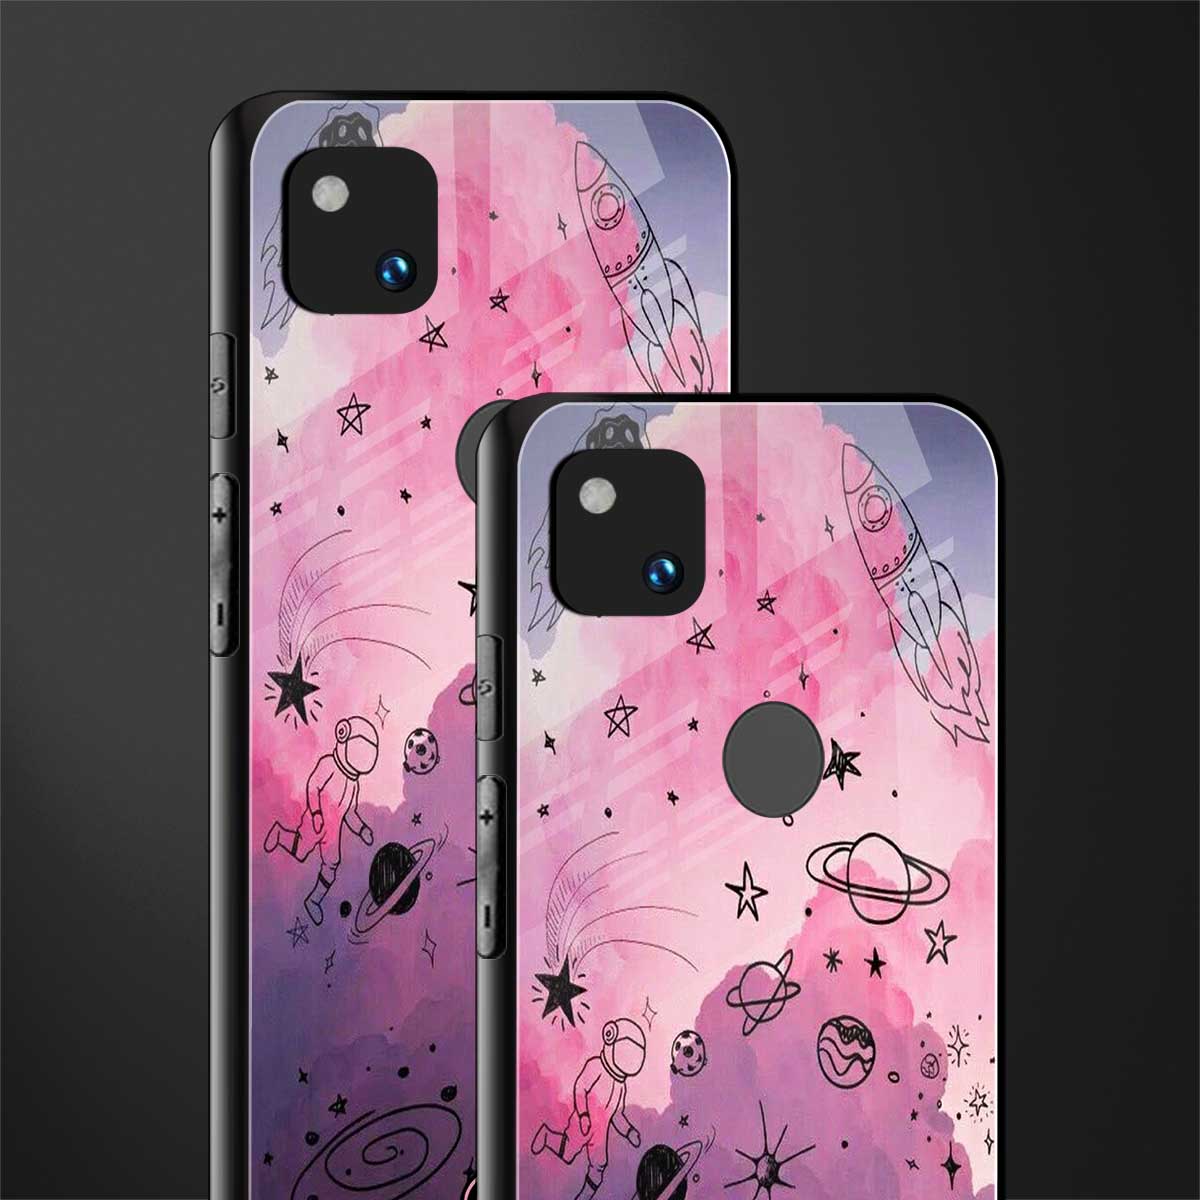 space pink aesthetic back phone cover | glass case for google pixel 4a 4g